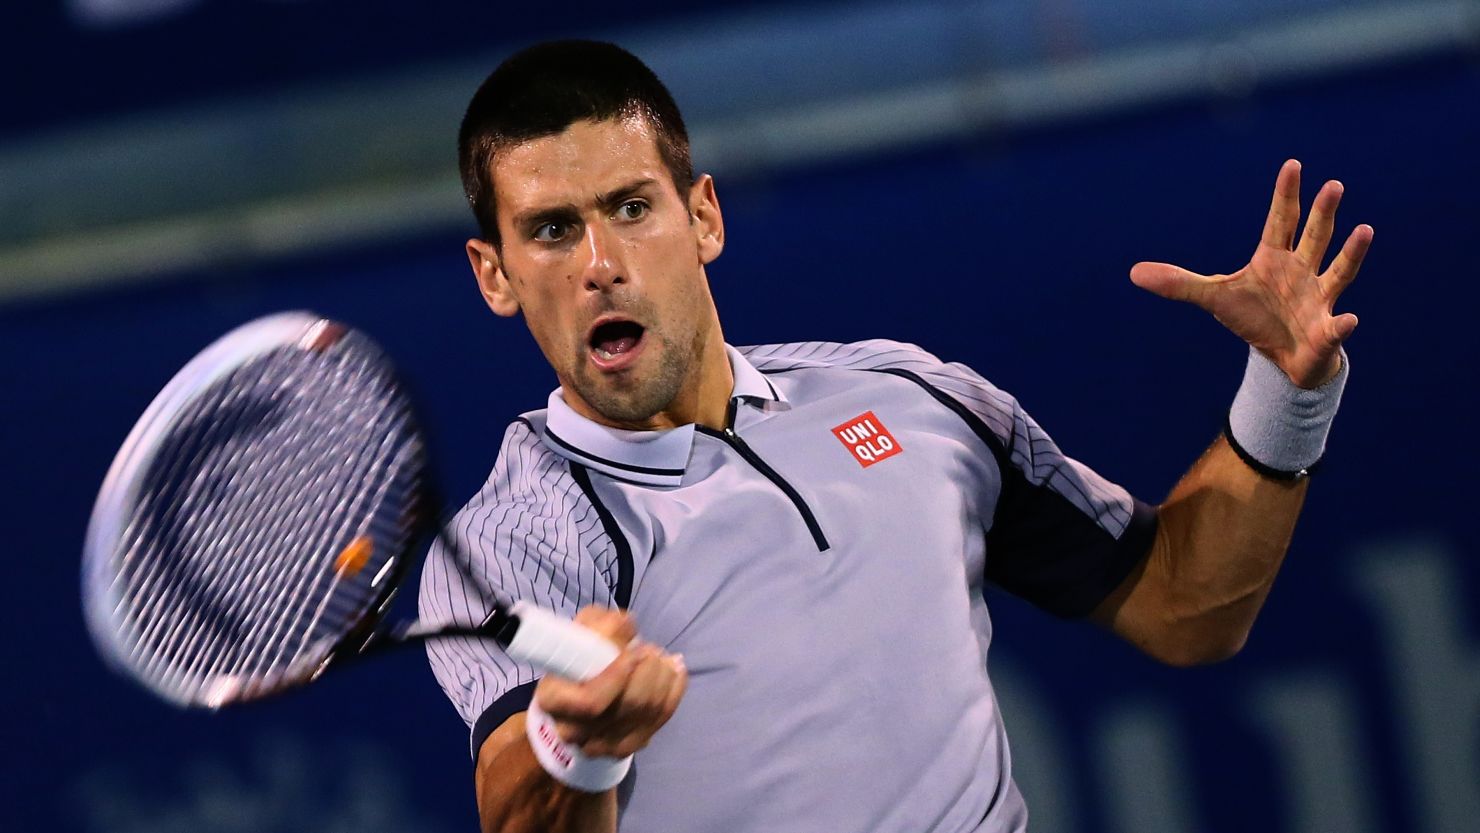 World No.1 Novak Djokovic powered his way to another ATP title against Tomas Berdych in Dubai on Saturday.  